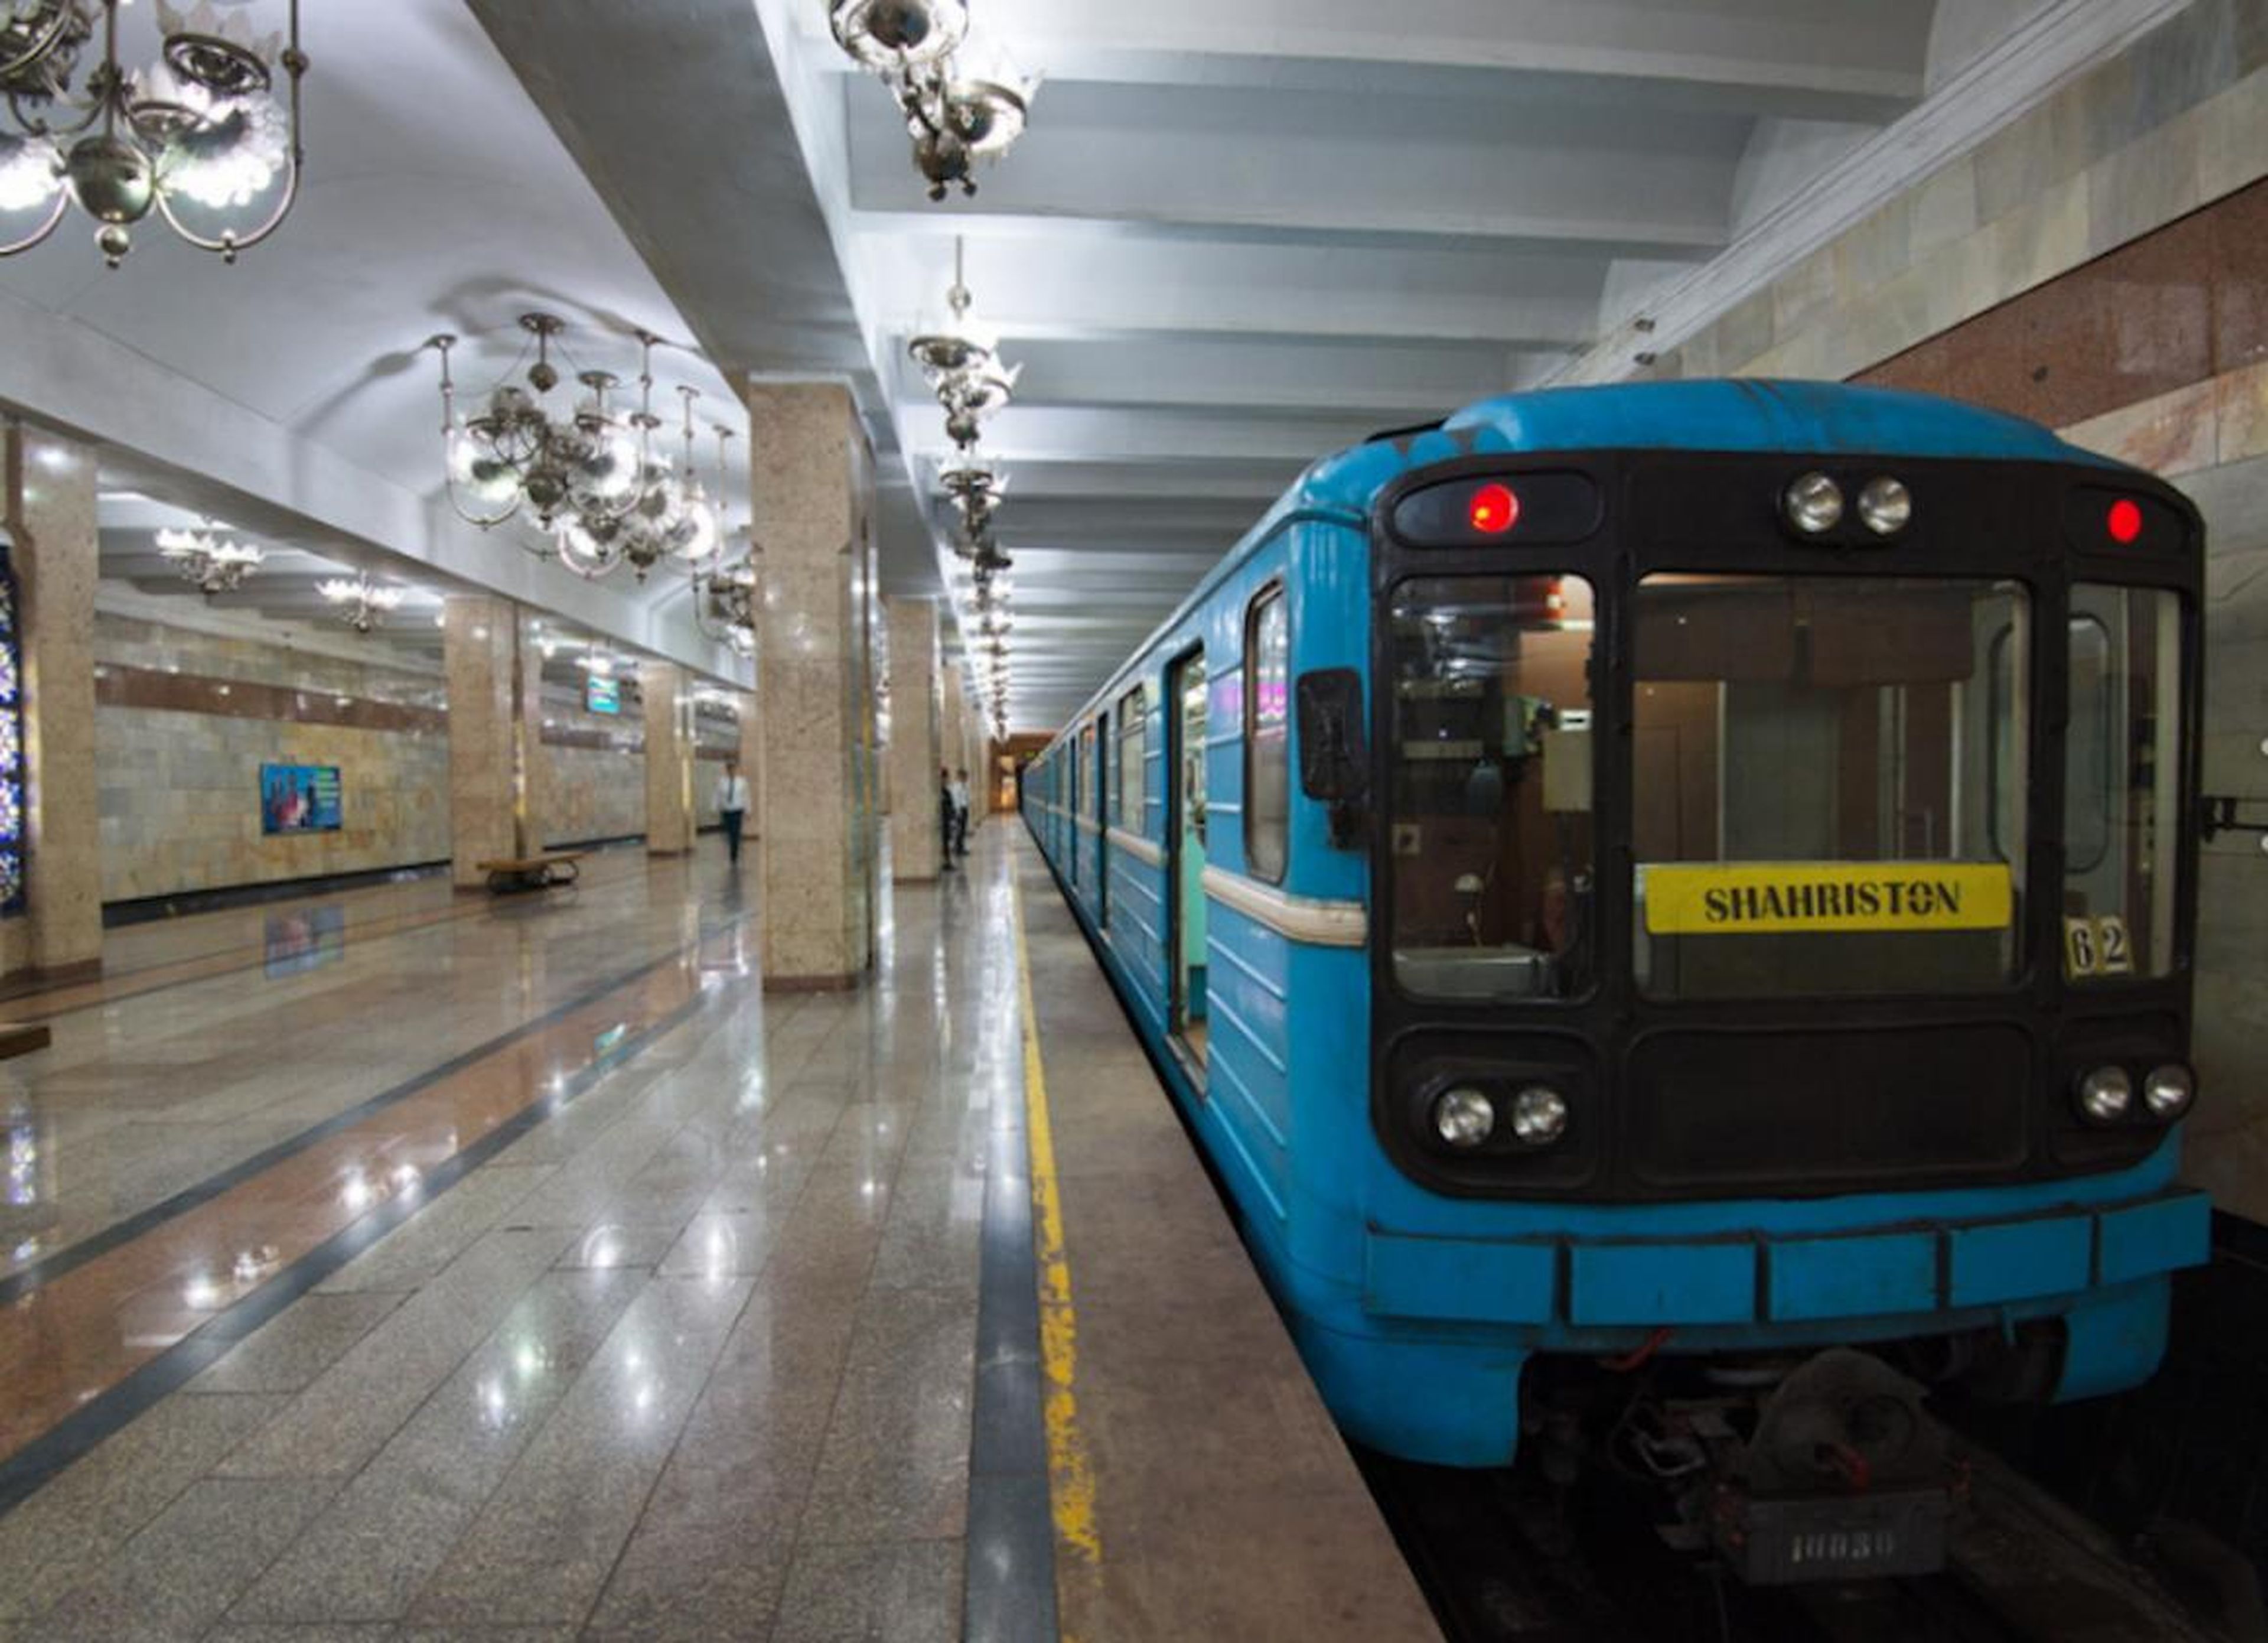 The subway is the cheapest in the former USSR. A trip on the subway costs 1,200 Uzbek soms (14 cents).